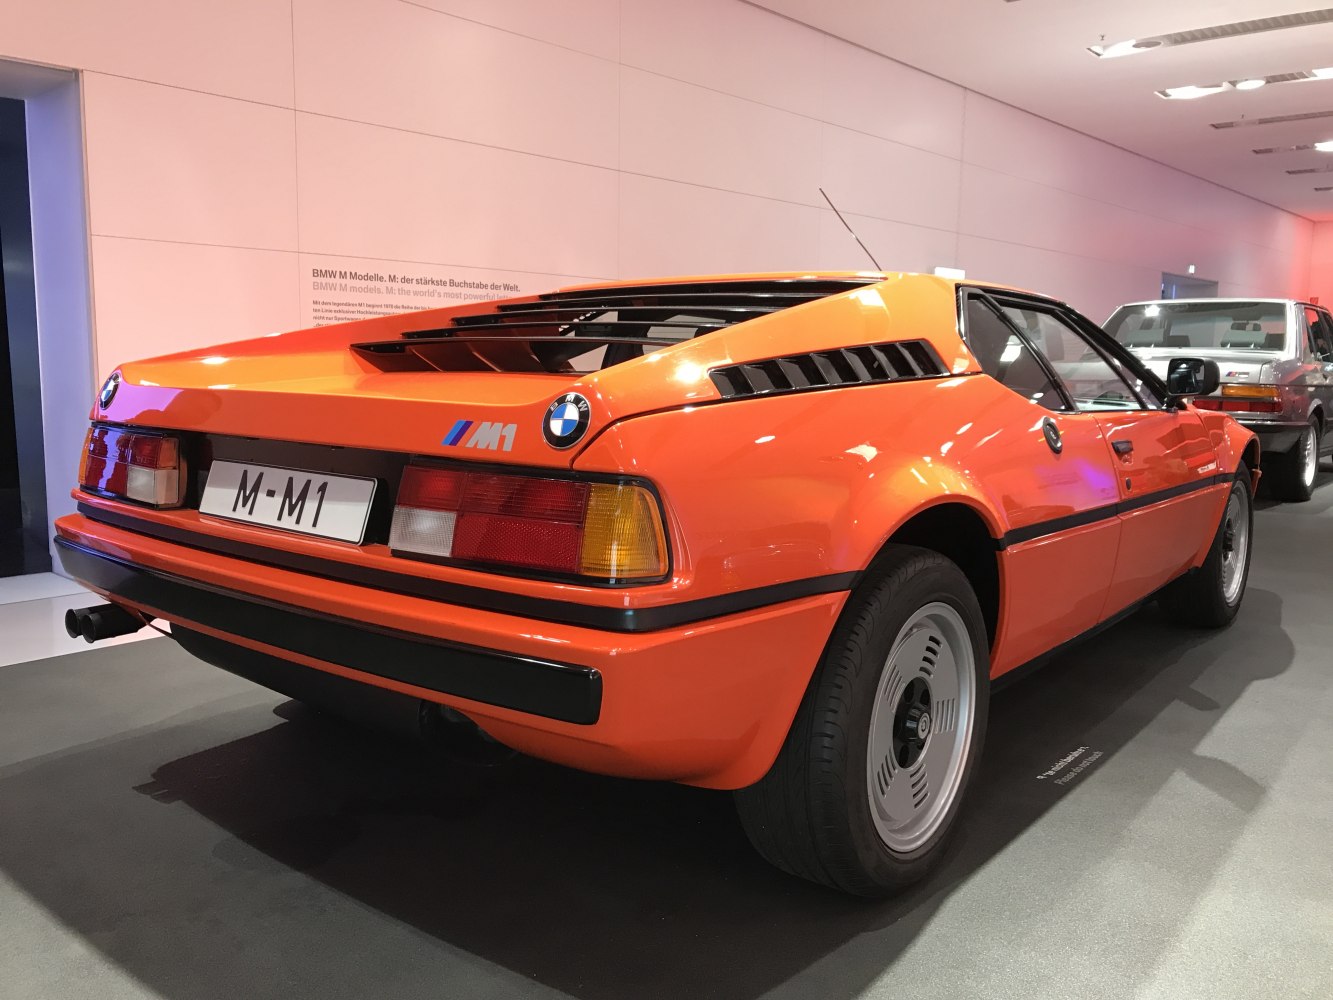 https://totalrenting.es/wp-content/uploads/2022/10/bmw-m1-e26-1978-3-5-277-cv-coupe-10.png